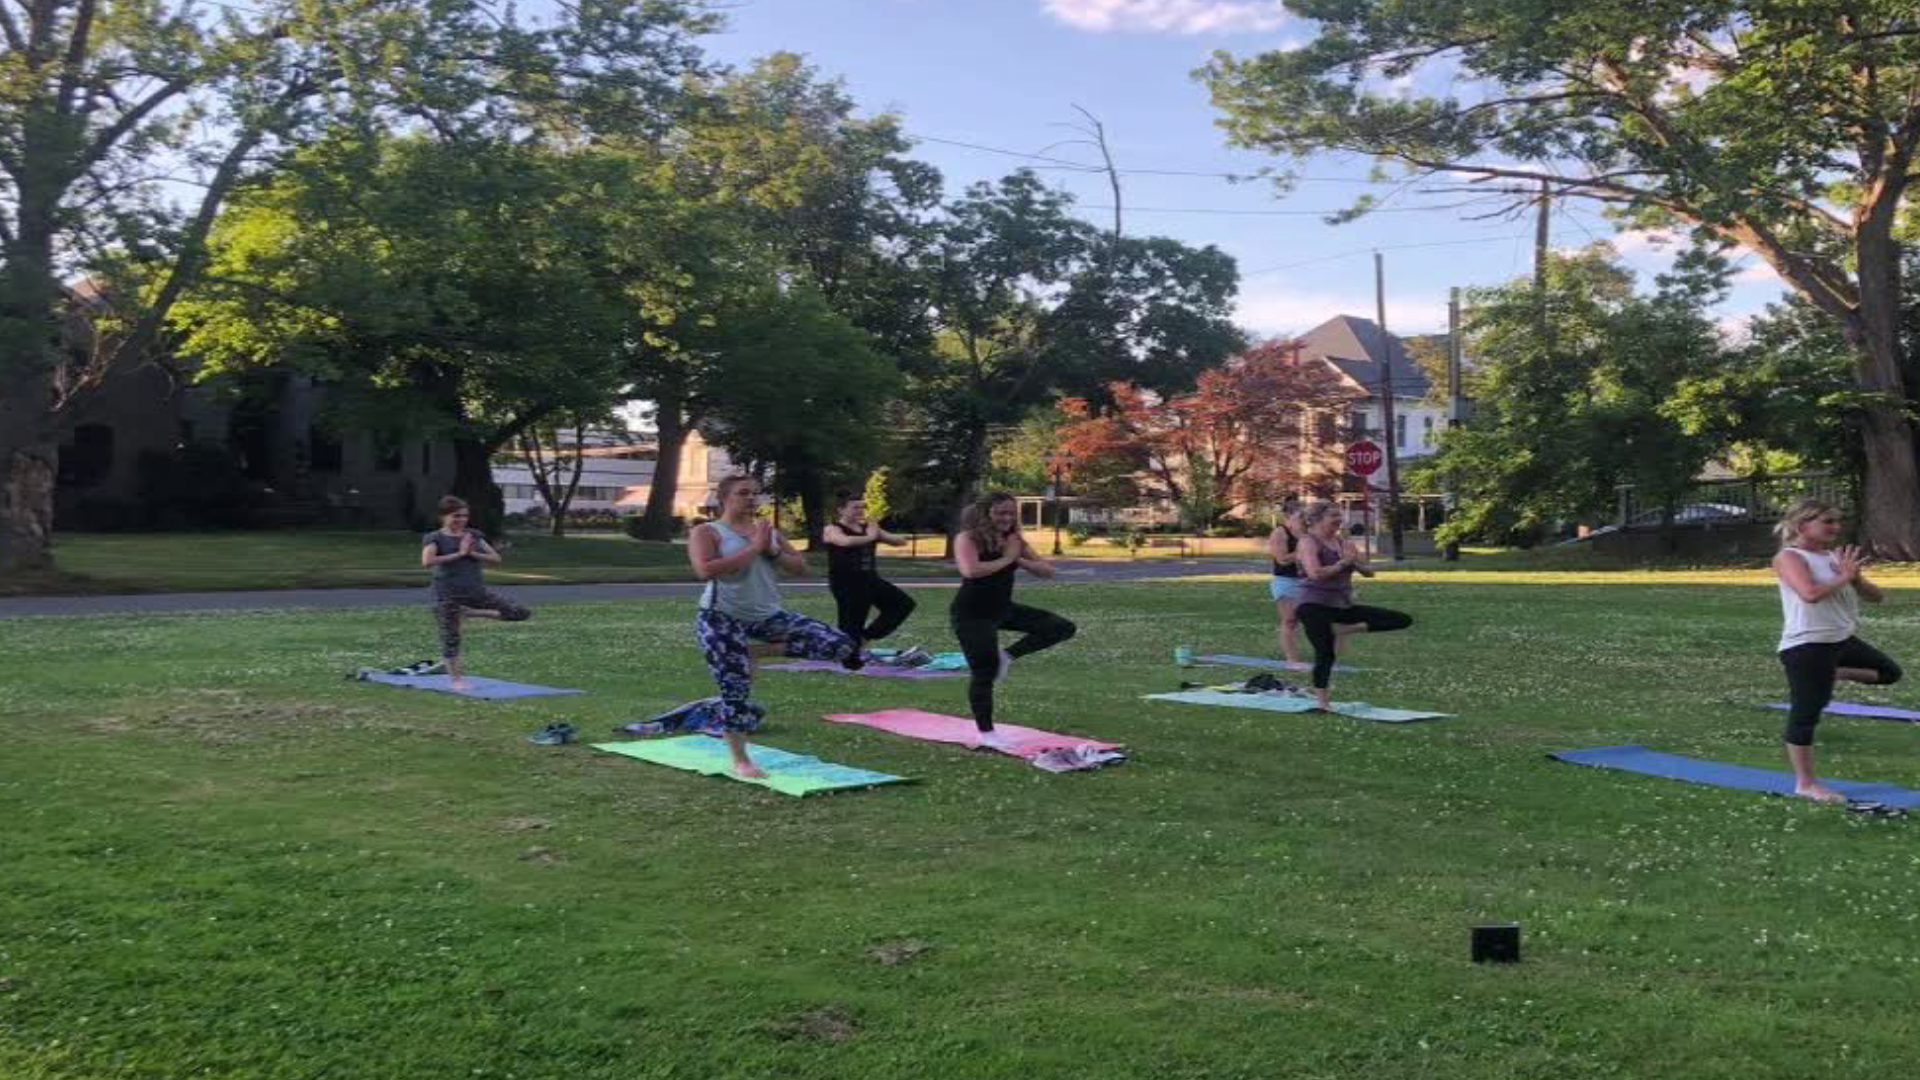 One yoga studio in Luzerne County will continue to adapt while days get shorter and pandemic continues.